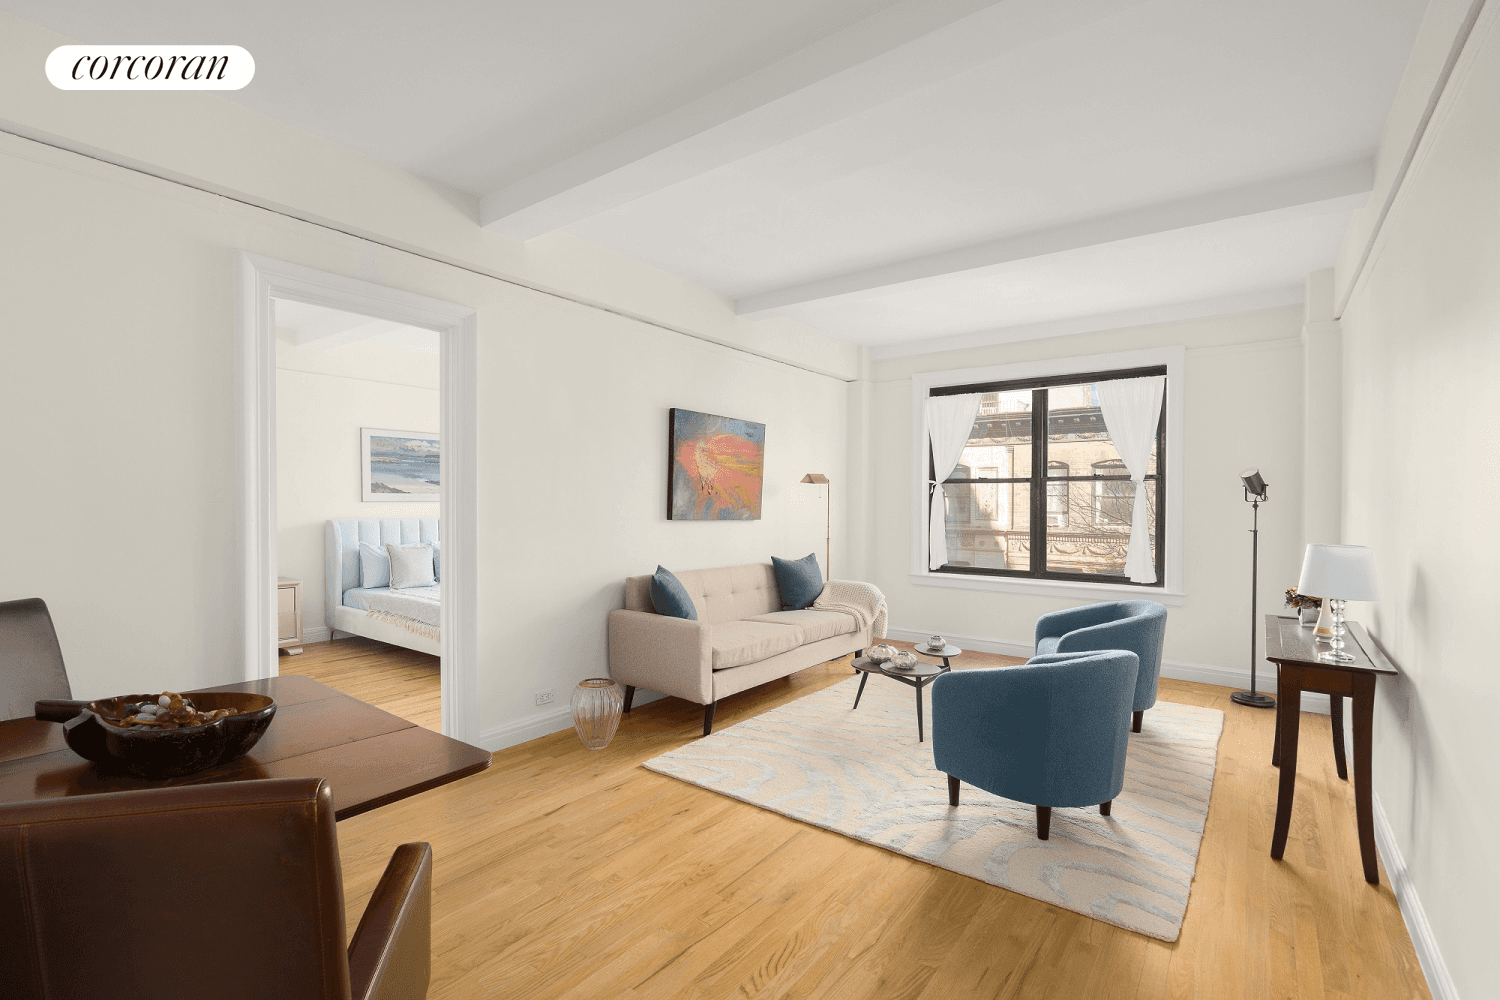 Price reduced ! Seller says sell this sunny, spacious two bedroom 2 bath with fabulous street and open sky views in established Pre War Coop building in the heart of ...